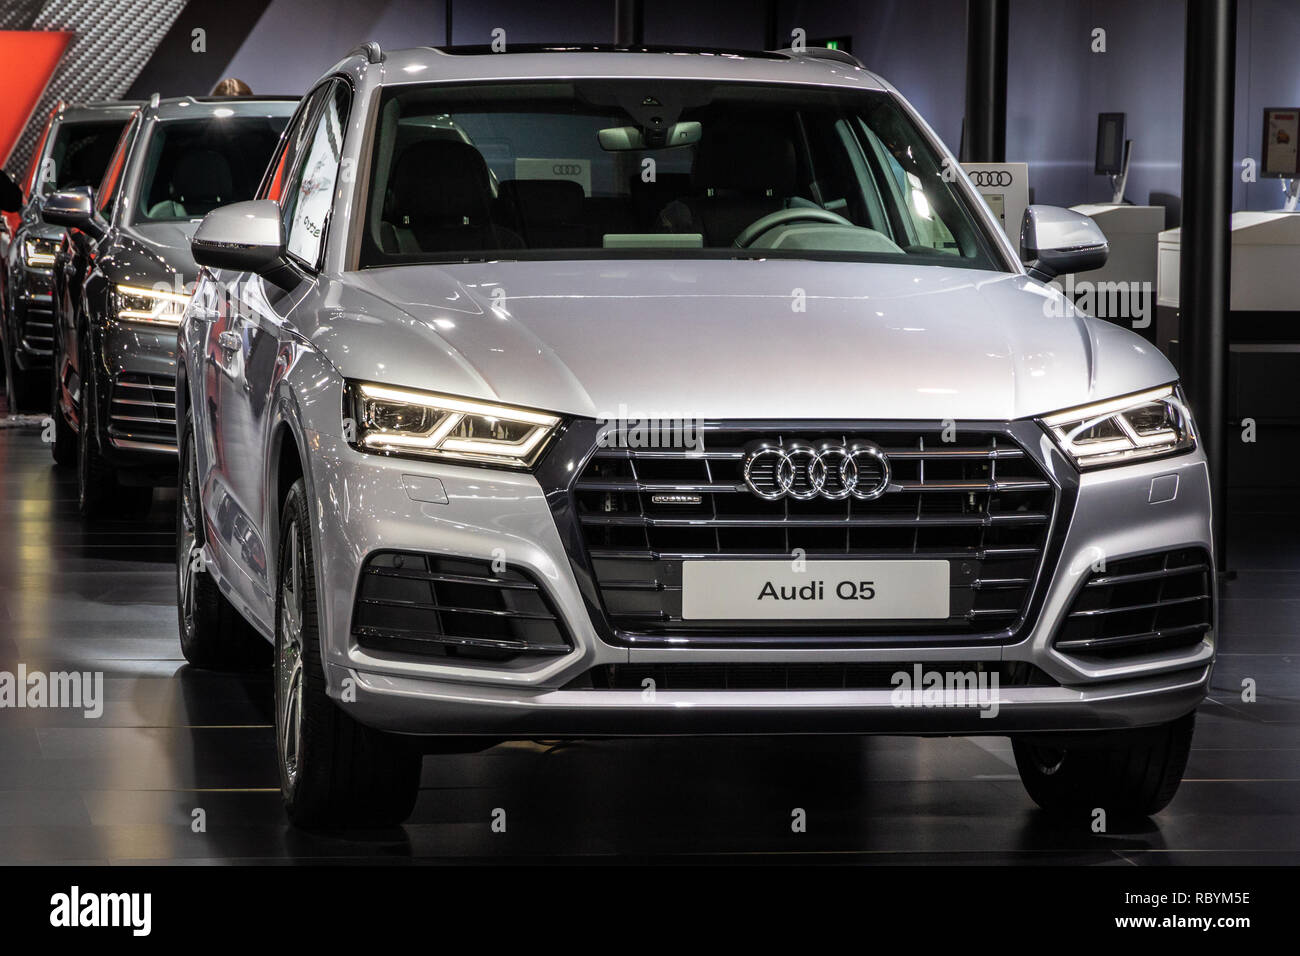 BRUSSELS - JAN 10, 2018: New Audi Q5 SUV car showcased at the Brussels Expo Autosalon motor show. Stock Photo